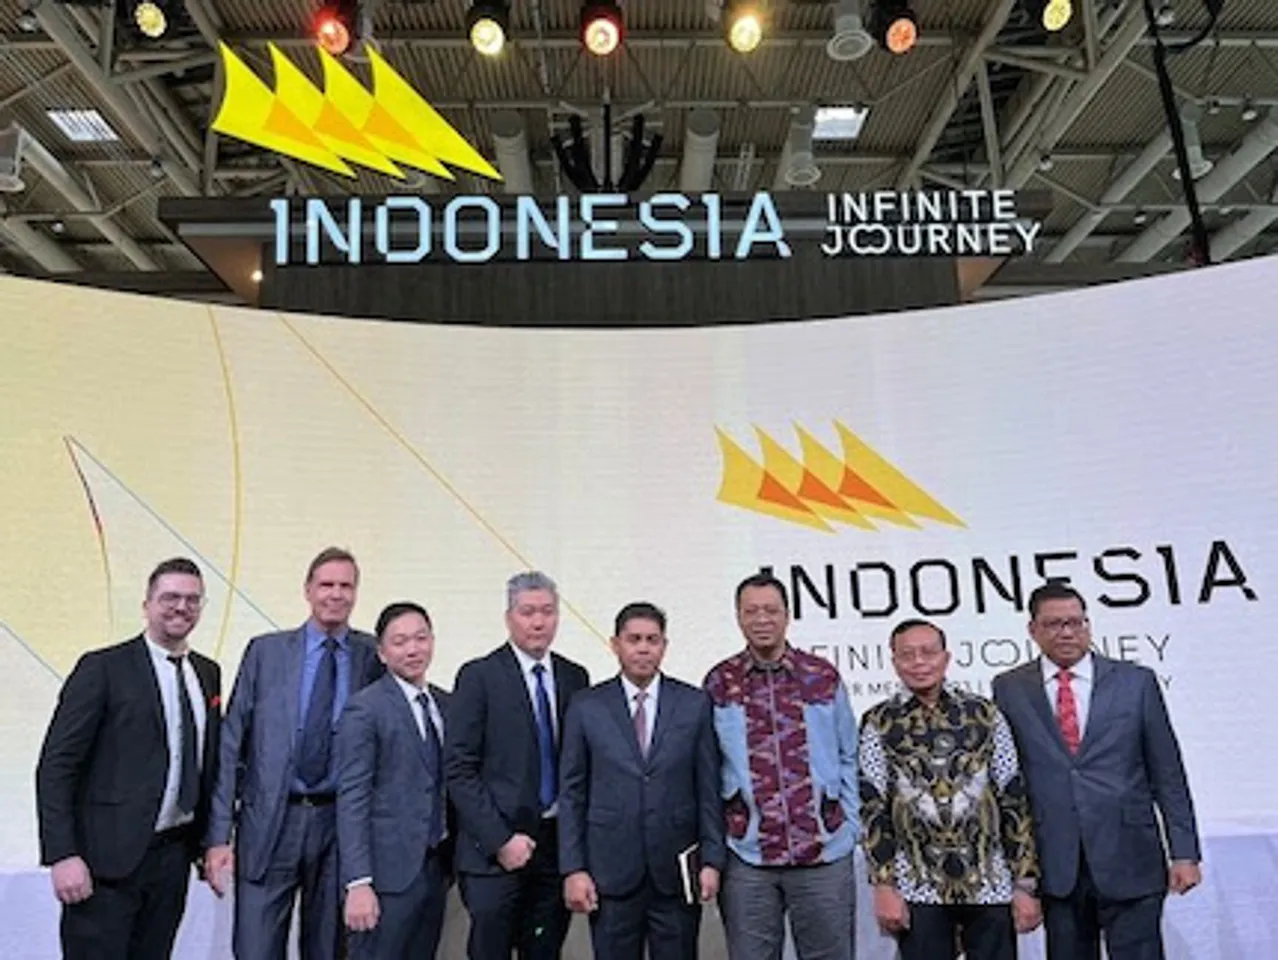 Hannover Messe 2023: The Indonesian Food and Beverage Producers Association (GAPMMI), a co-exhibitor, with MARS-ENVOTEC (SG/DE) agreeing to support the circular economy by developing industrial technology for the recycling process. MARS-ENVOTEC will also join Ministry of Industry's PIDI 4.0 (Center for Digital Industry 4.0) as an expert on renewable energy and waste management.